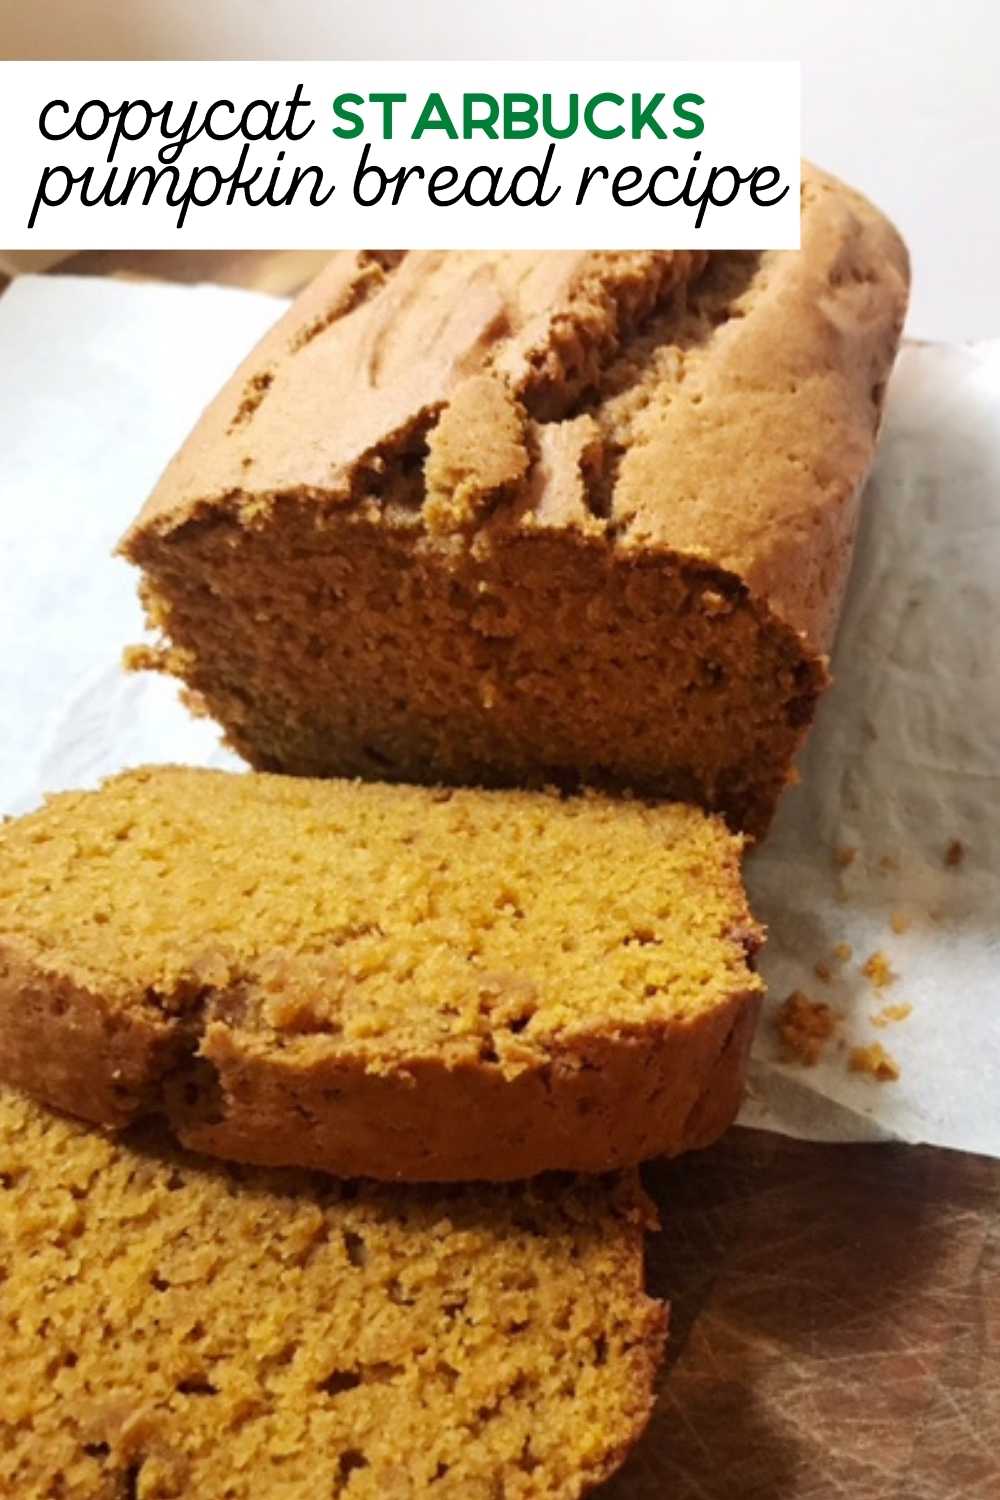 One of my favorite splurge treats to grab is the pumpkin bread at Starbucks! This recipe will let you make your own at home! It's moist with just the right amount of fall flavor.